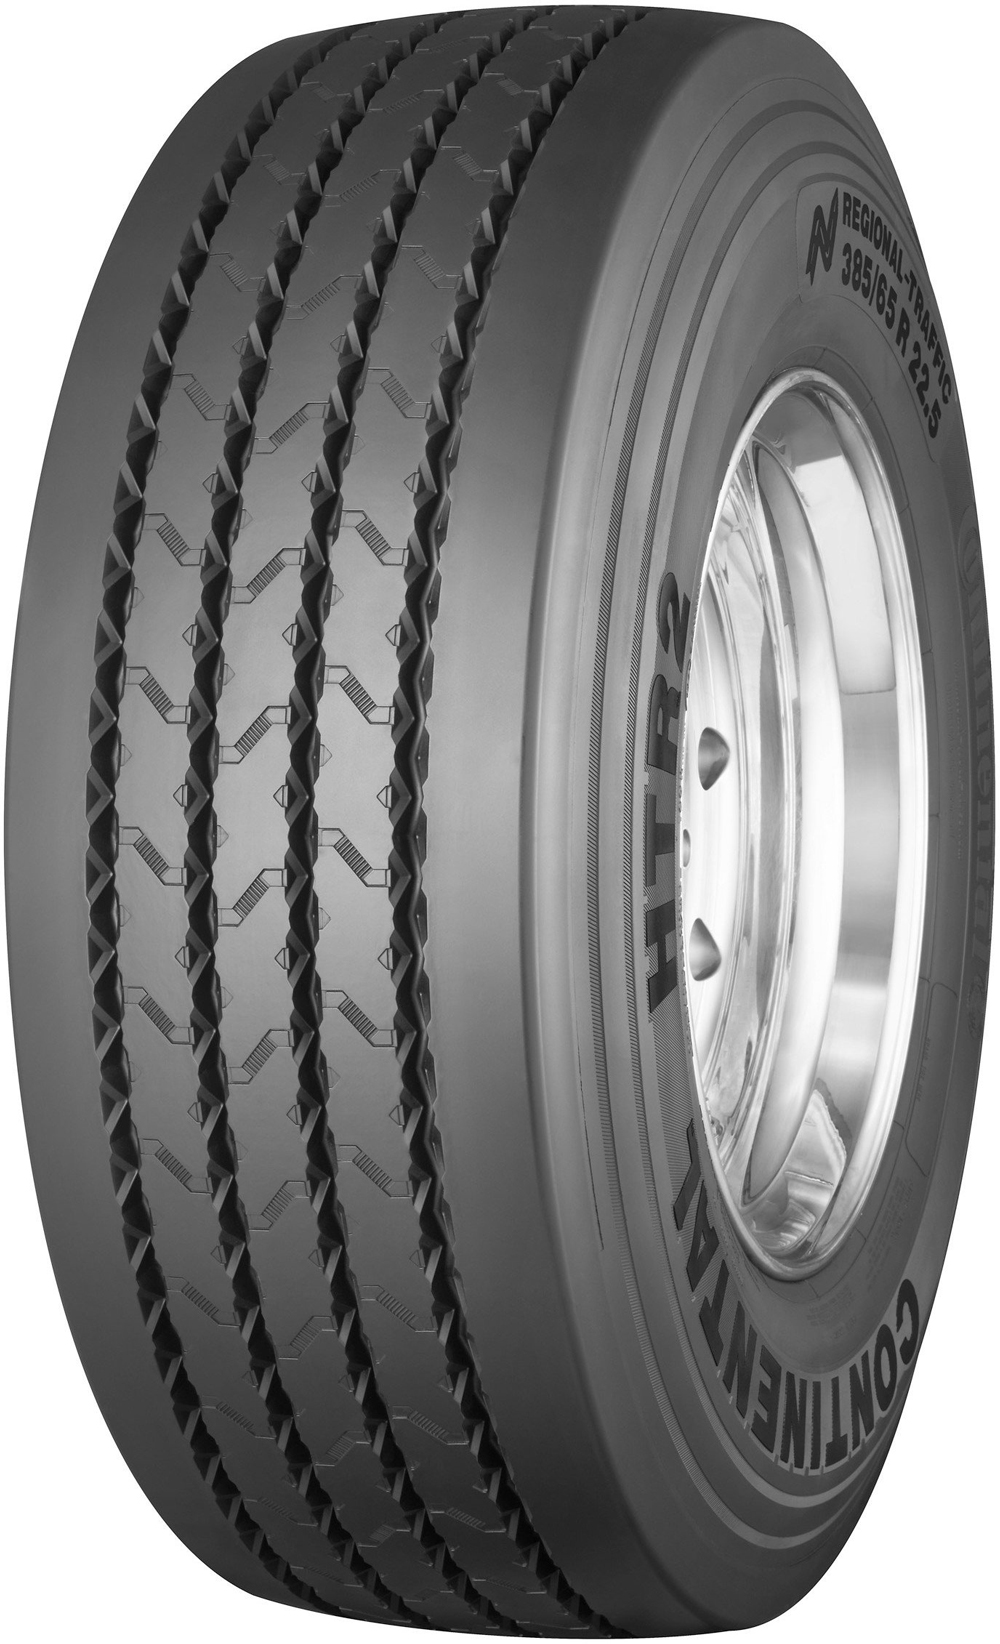 product_type-heavy_tires CONTINENTAL HTR2 ED 385/65 R22.5 160K